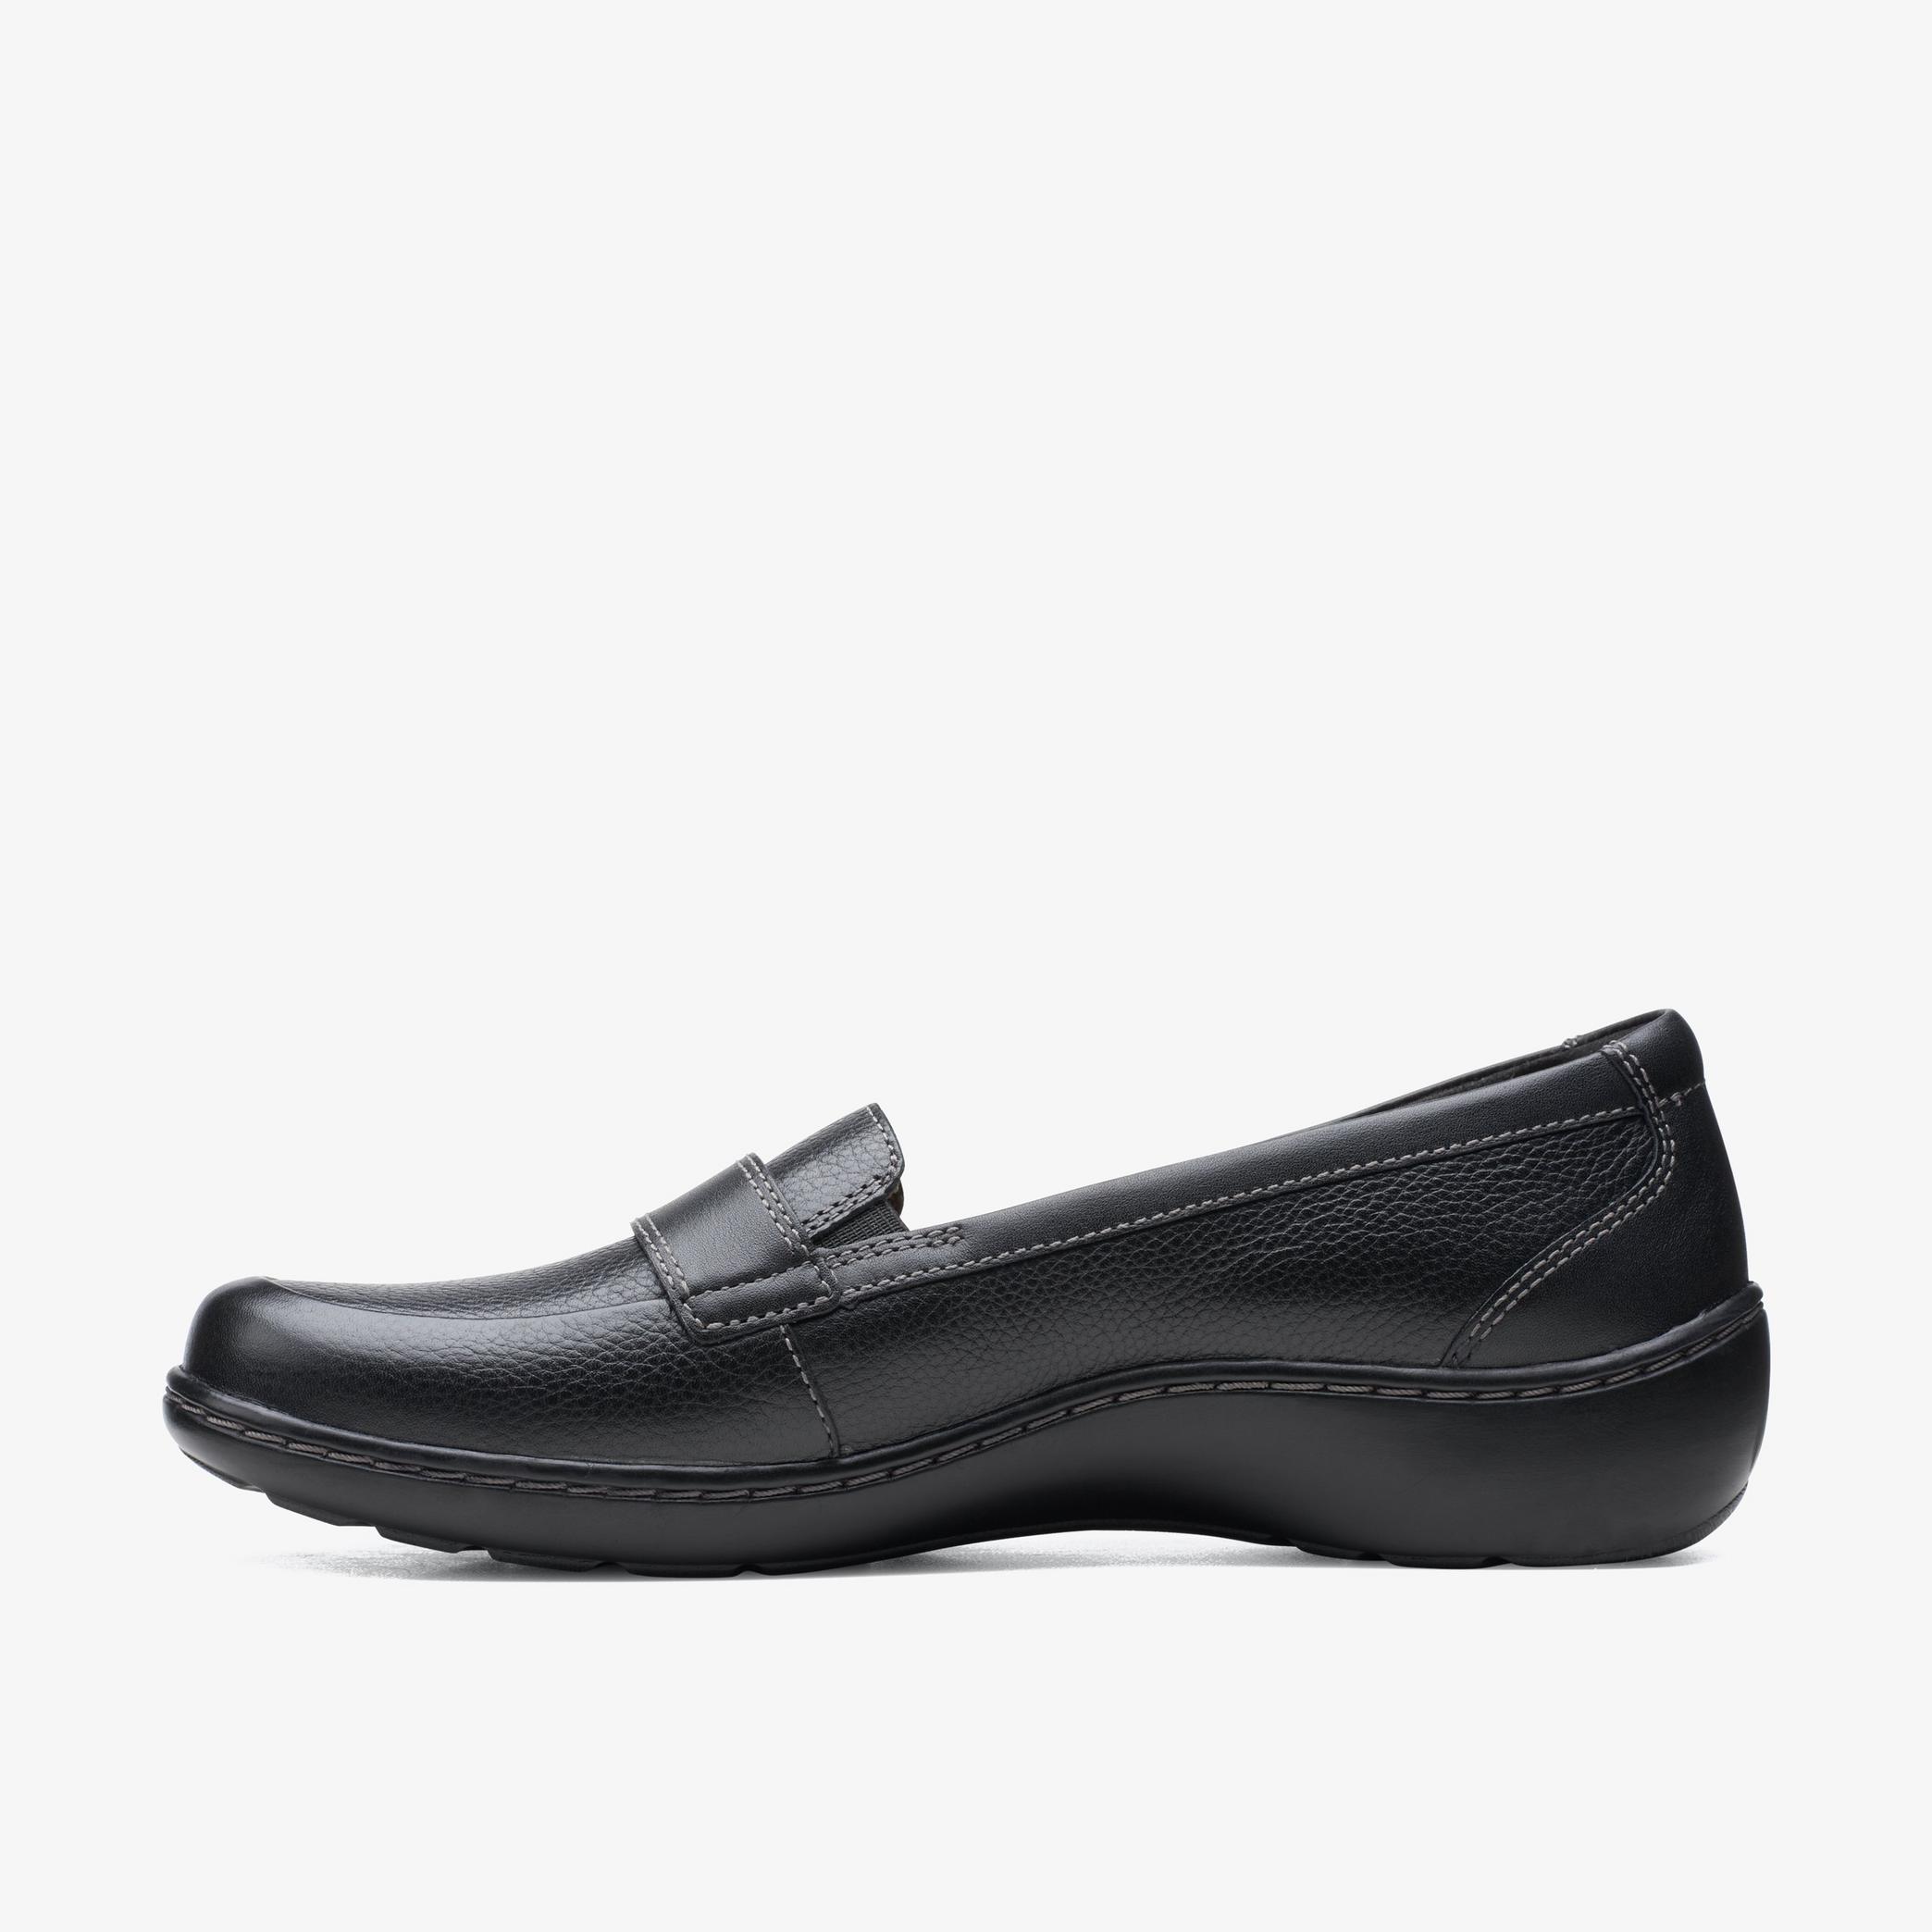 Cora Daisy Black Tumbled Loafers, view 2 of 6